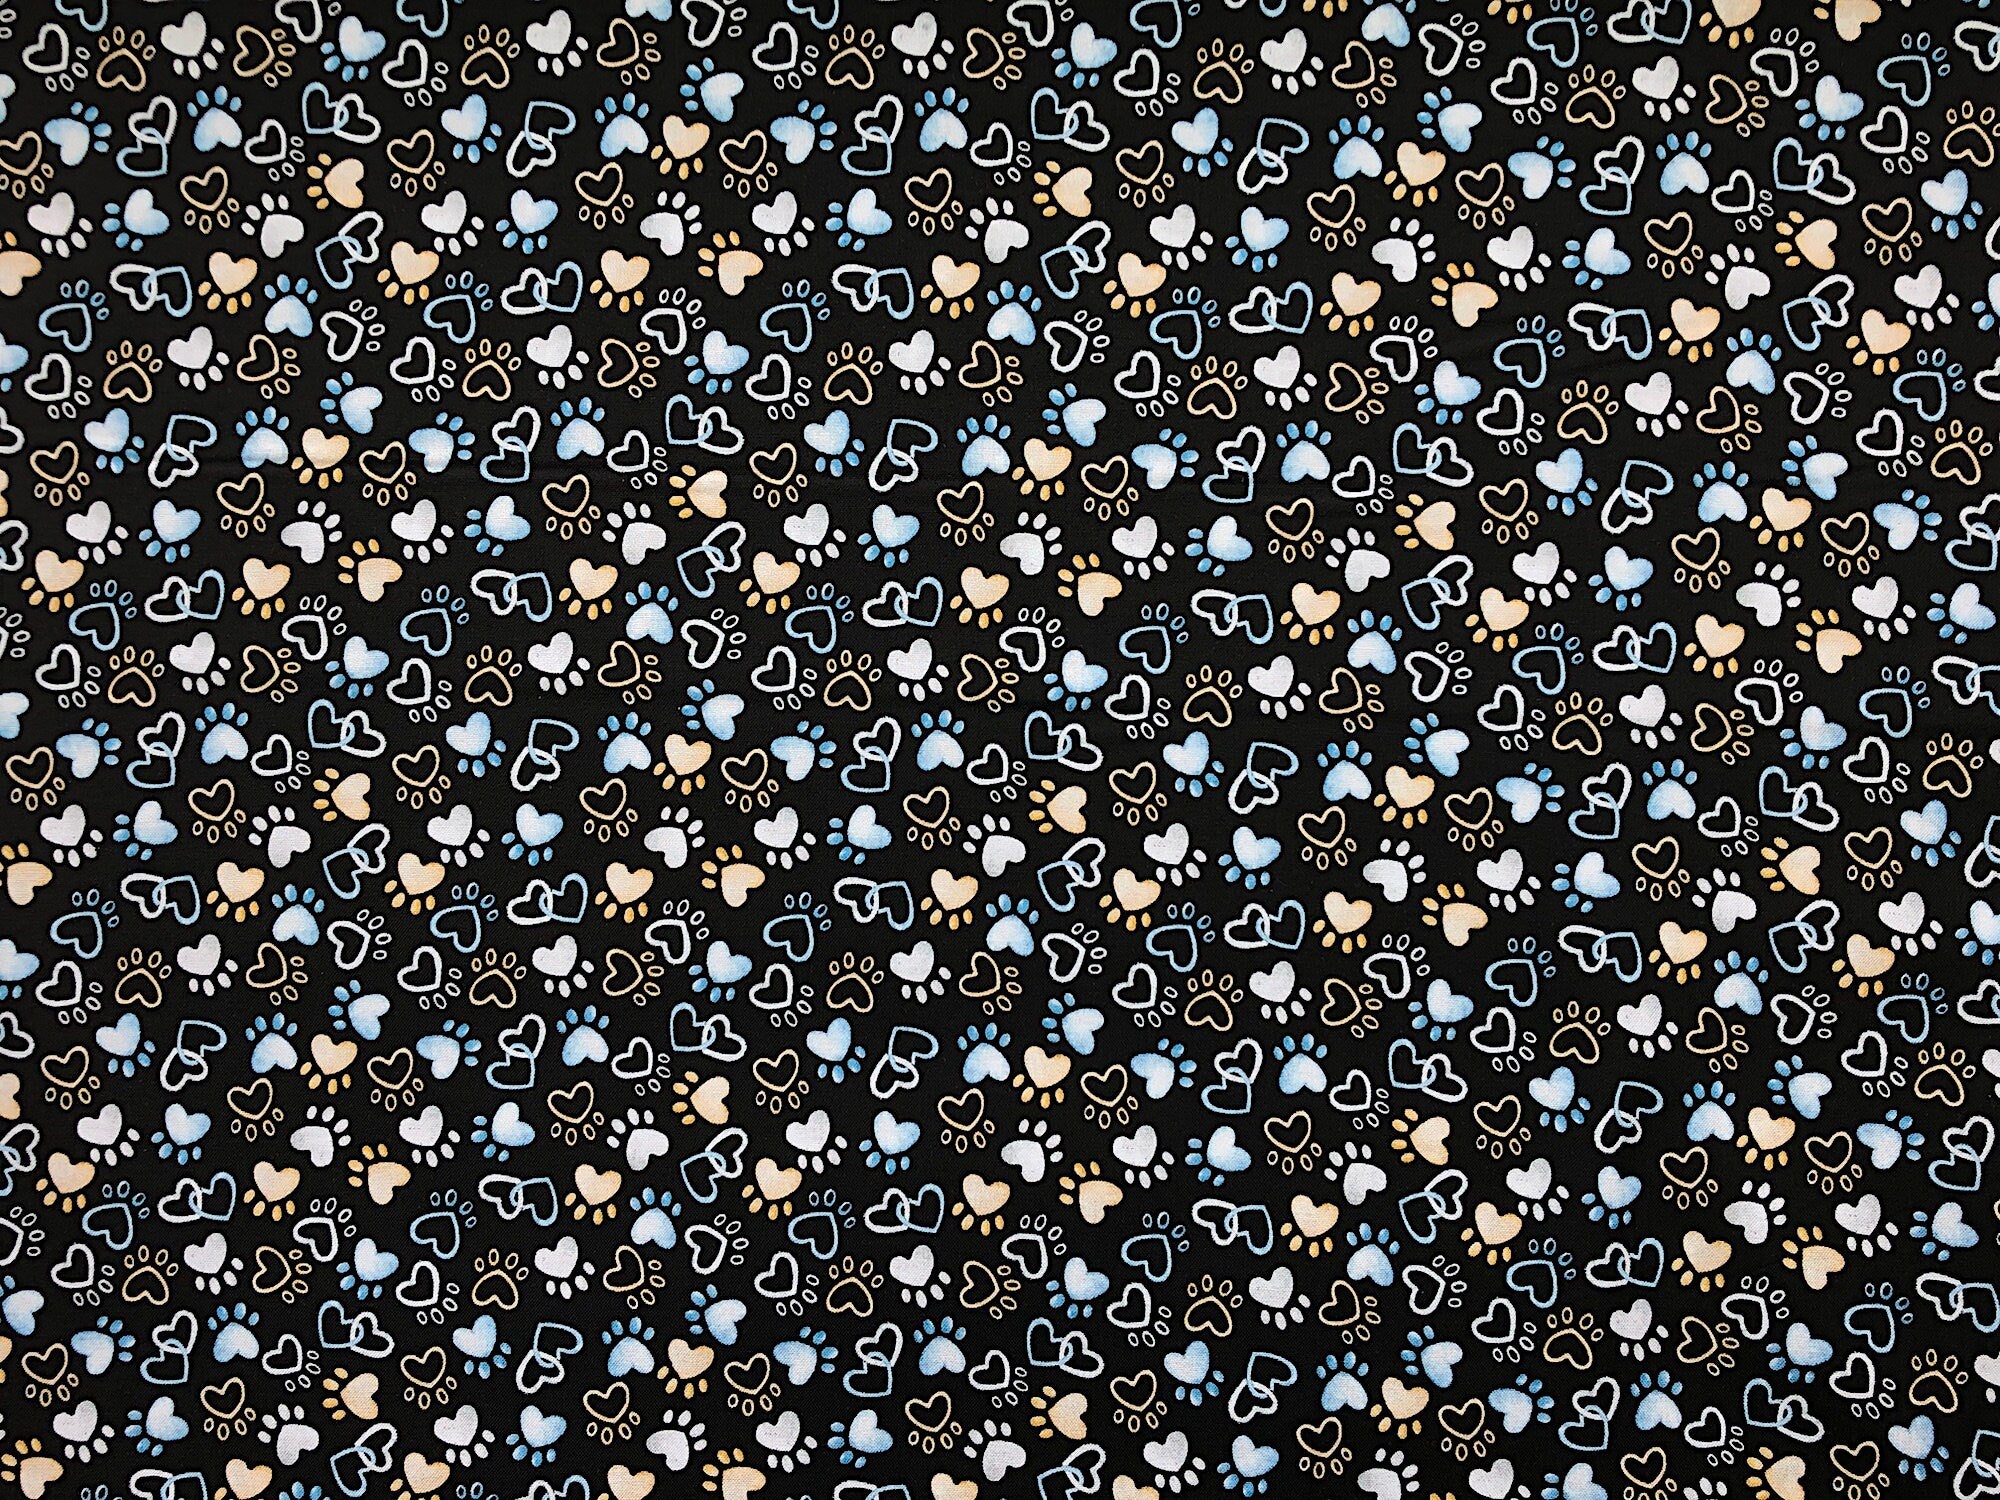 This black fabric is covered with paw prints and hearts. This fabric is part of the Think Pawsitive collection designed by Andi Metz